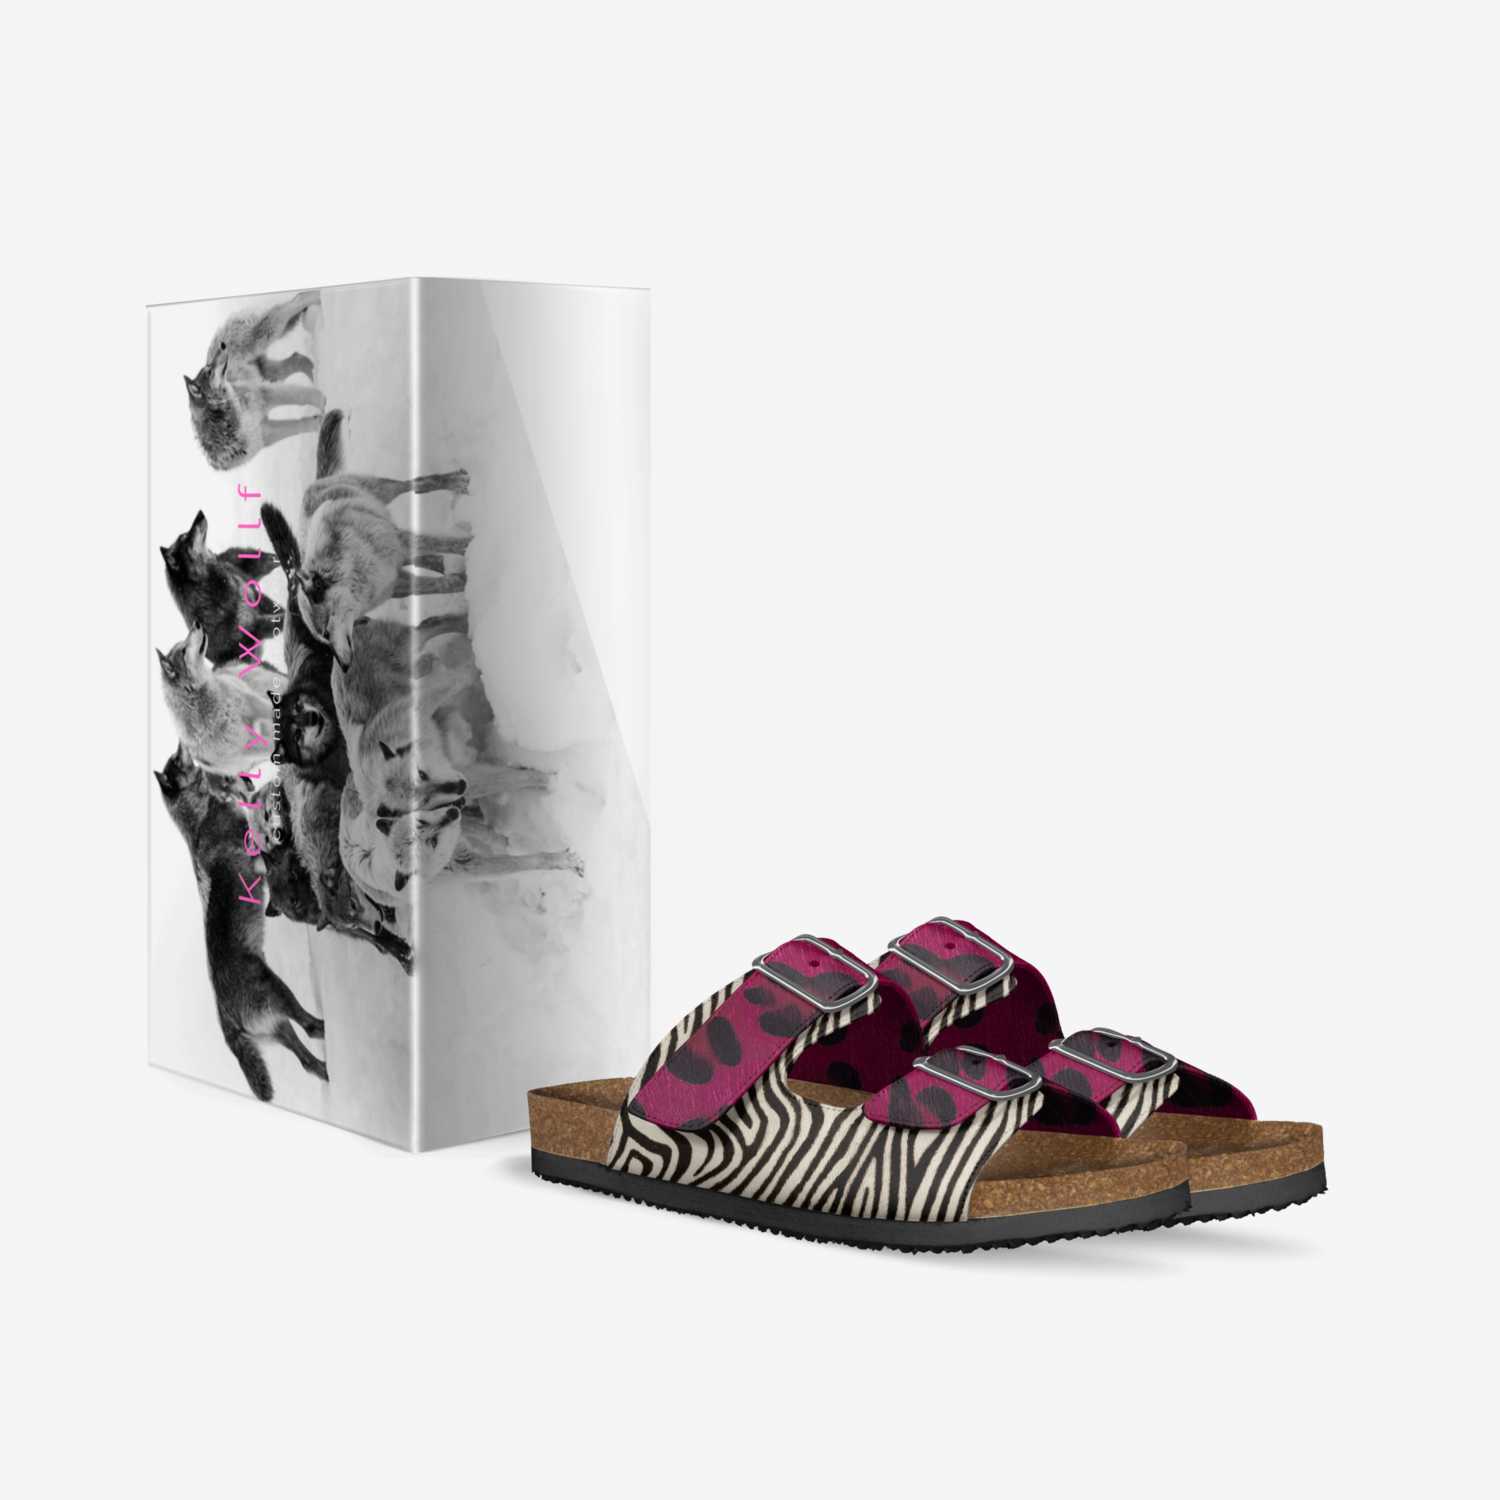 The Wild Side Pink custom made in Italy shoes by Kelly Wollf | Box view